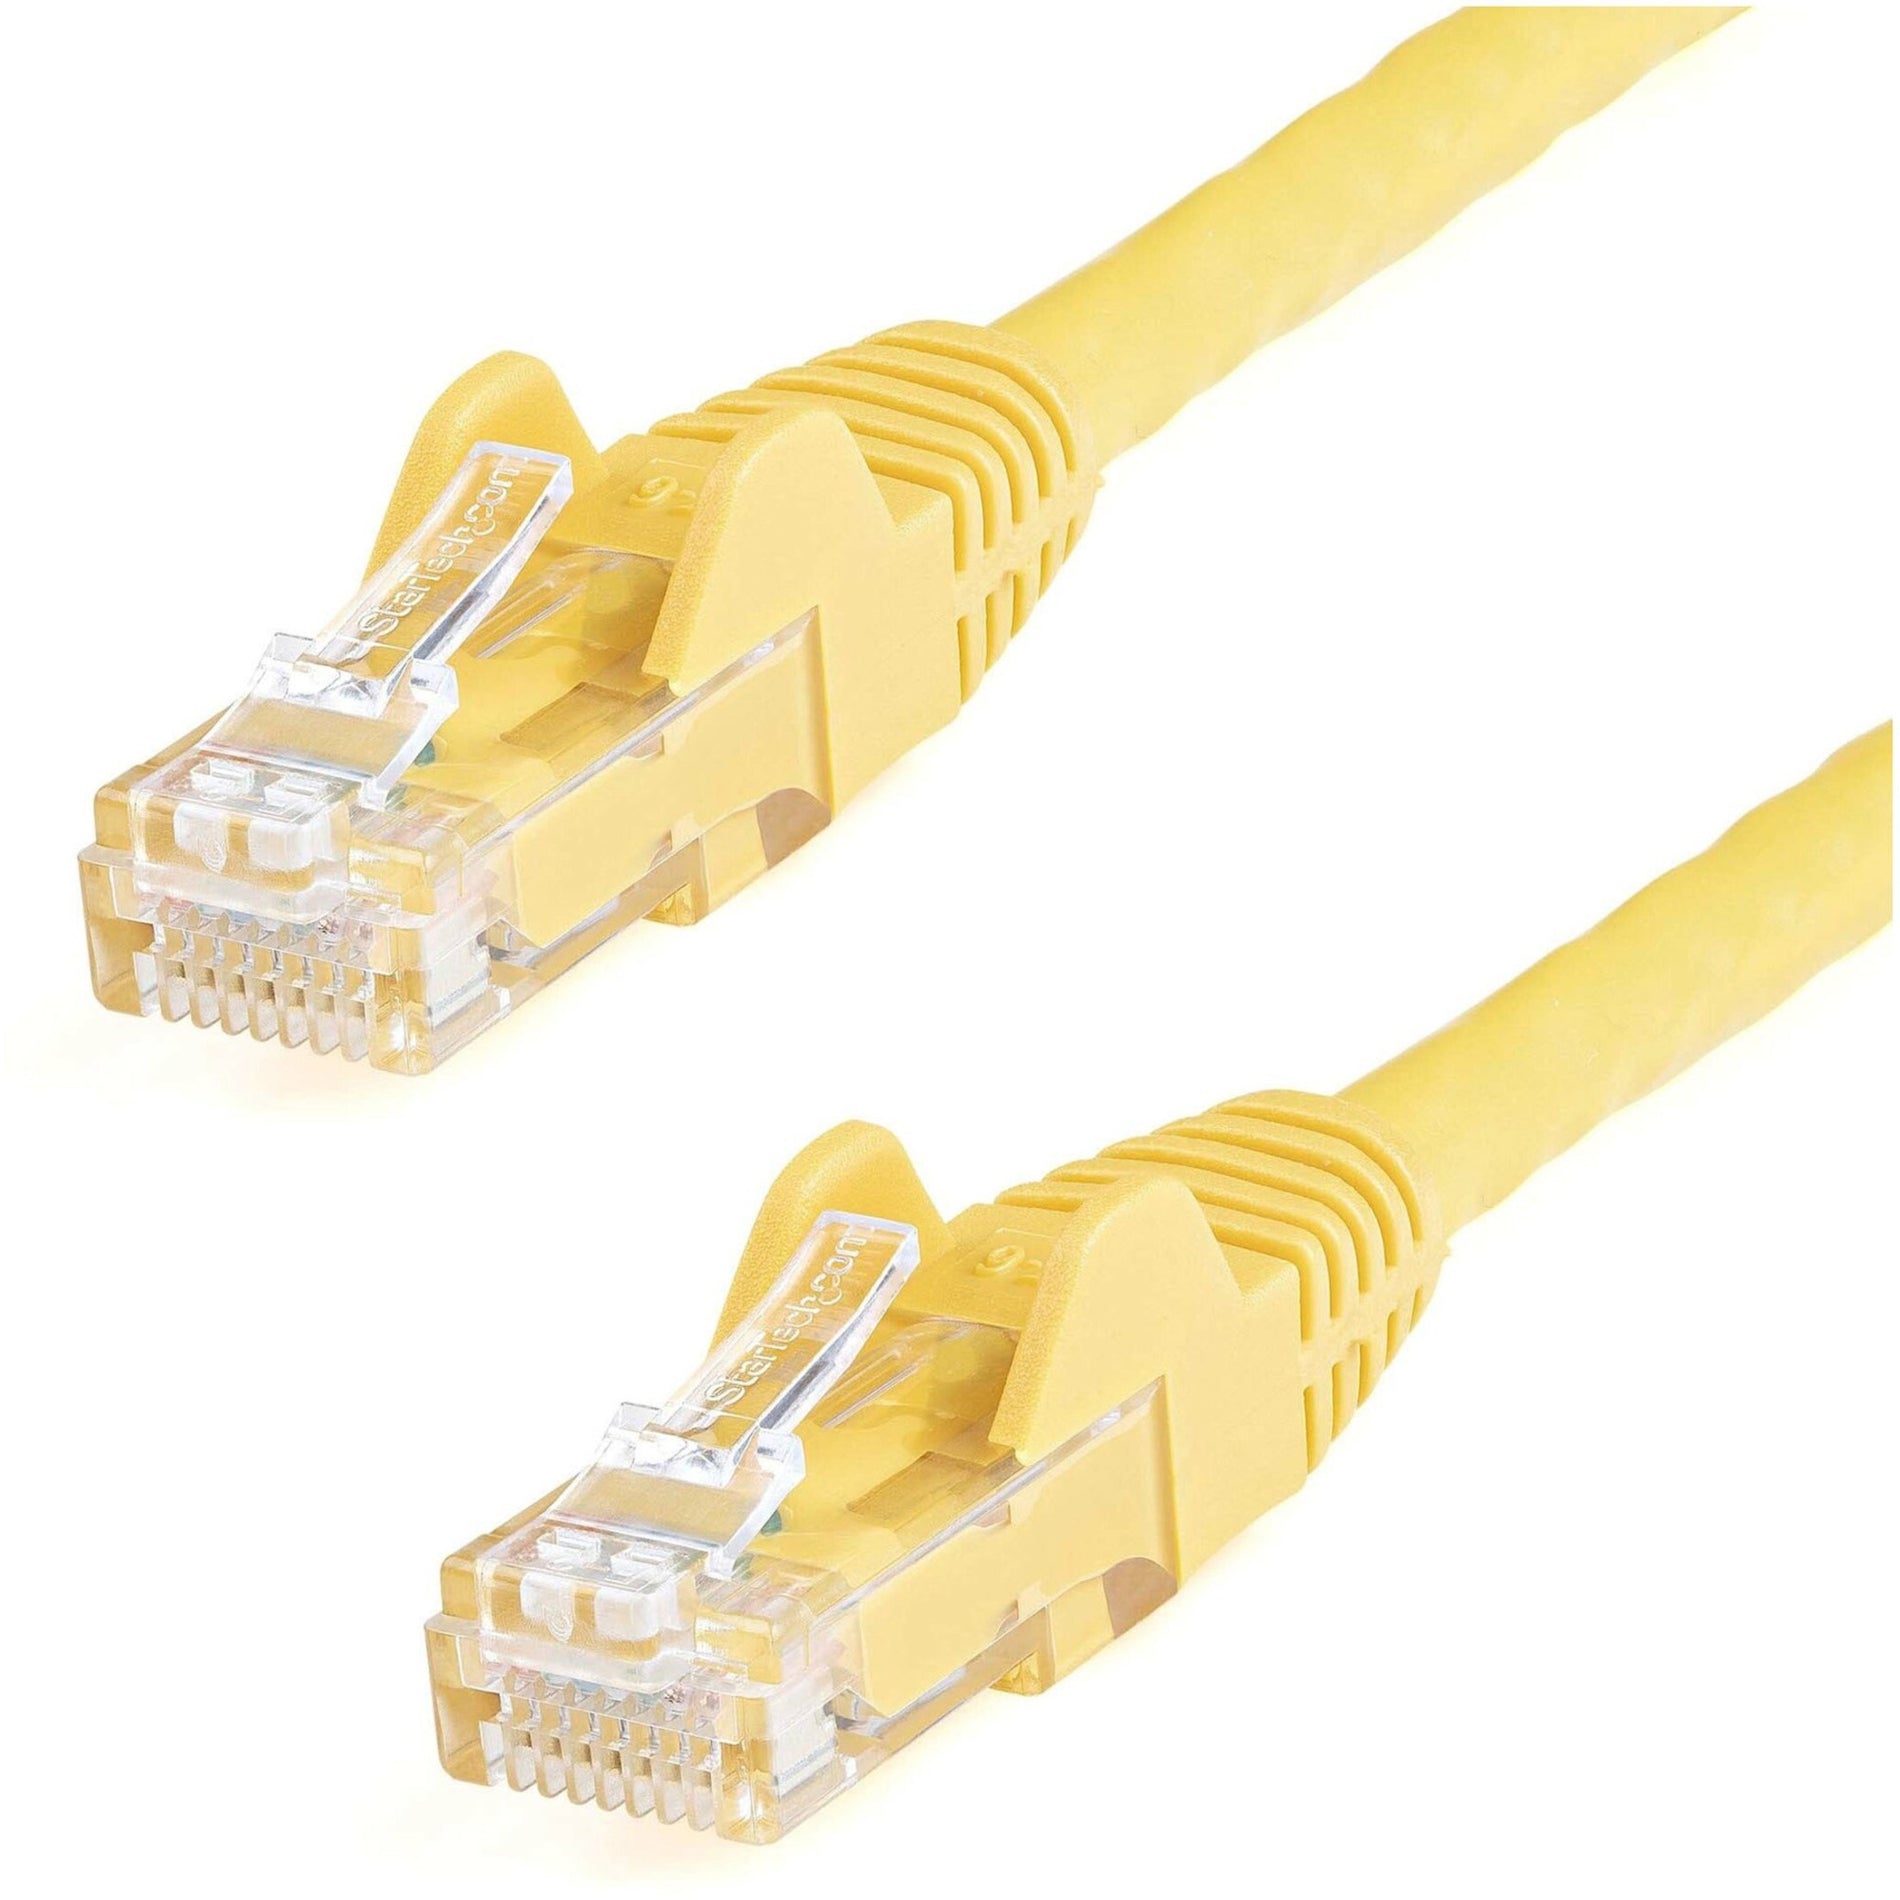 StarTech.com N6PATCH10YL 10 ft Yellow Snagless Cat6 UTP Patch Cable, Lifetime Warranty, UL Listed, ETL Verified, 10 Gbit/s Data Transfer Rate, RJ45 Connector Clip Protectors